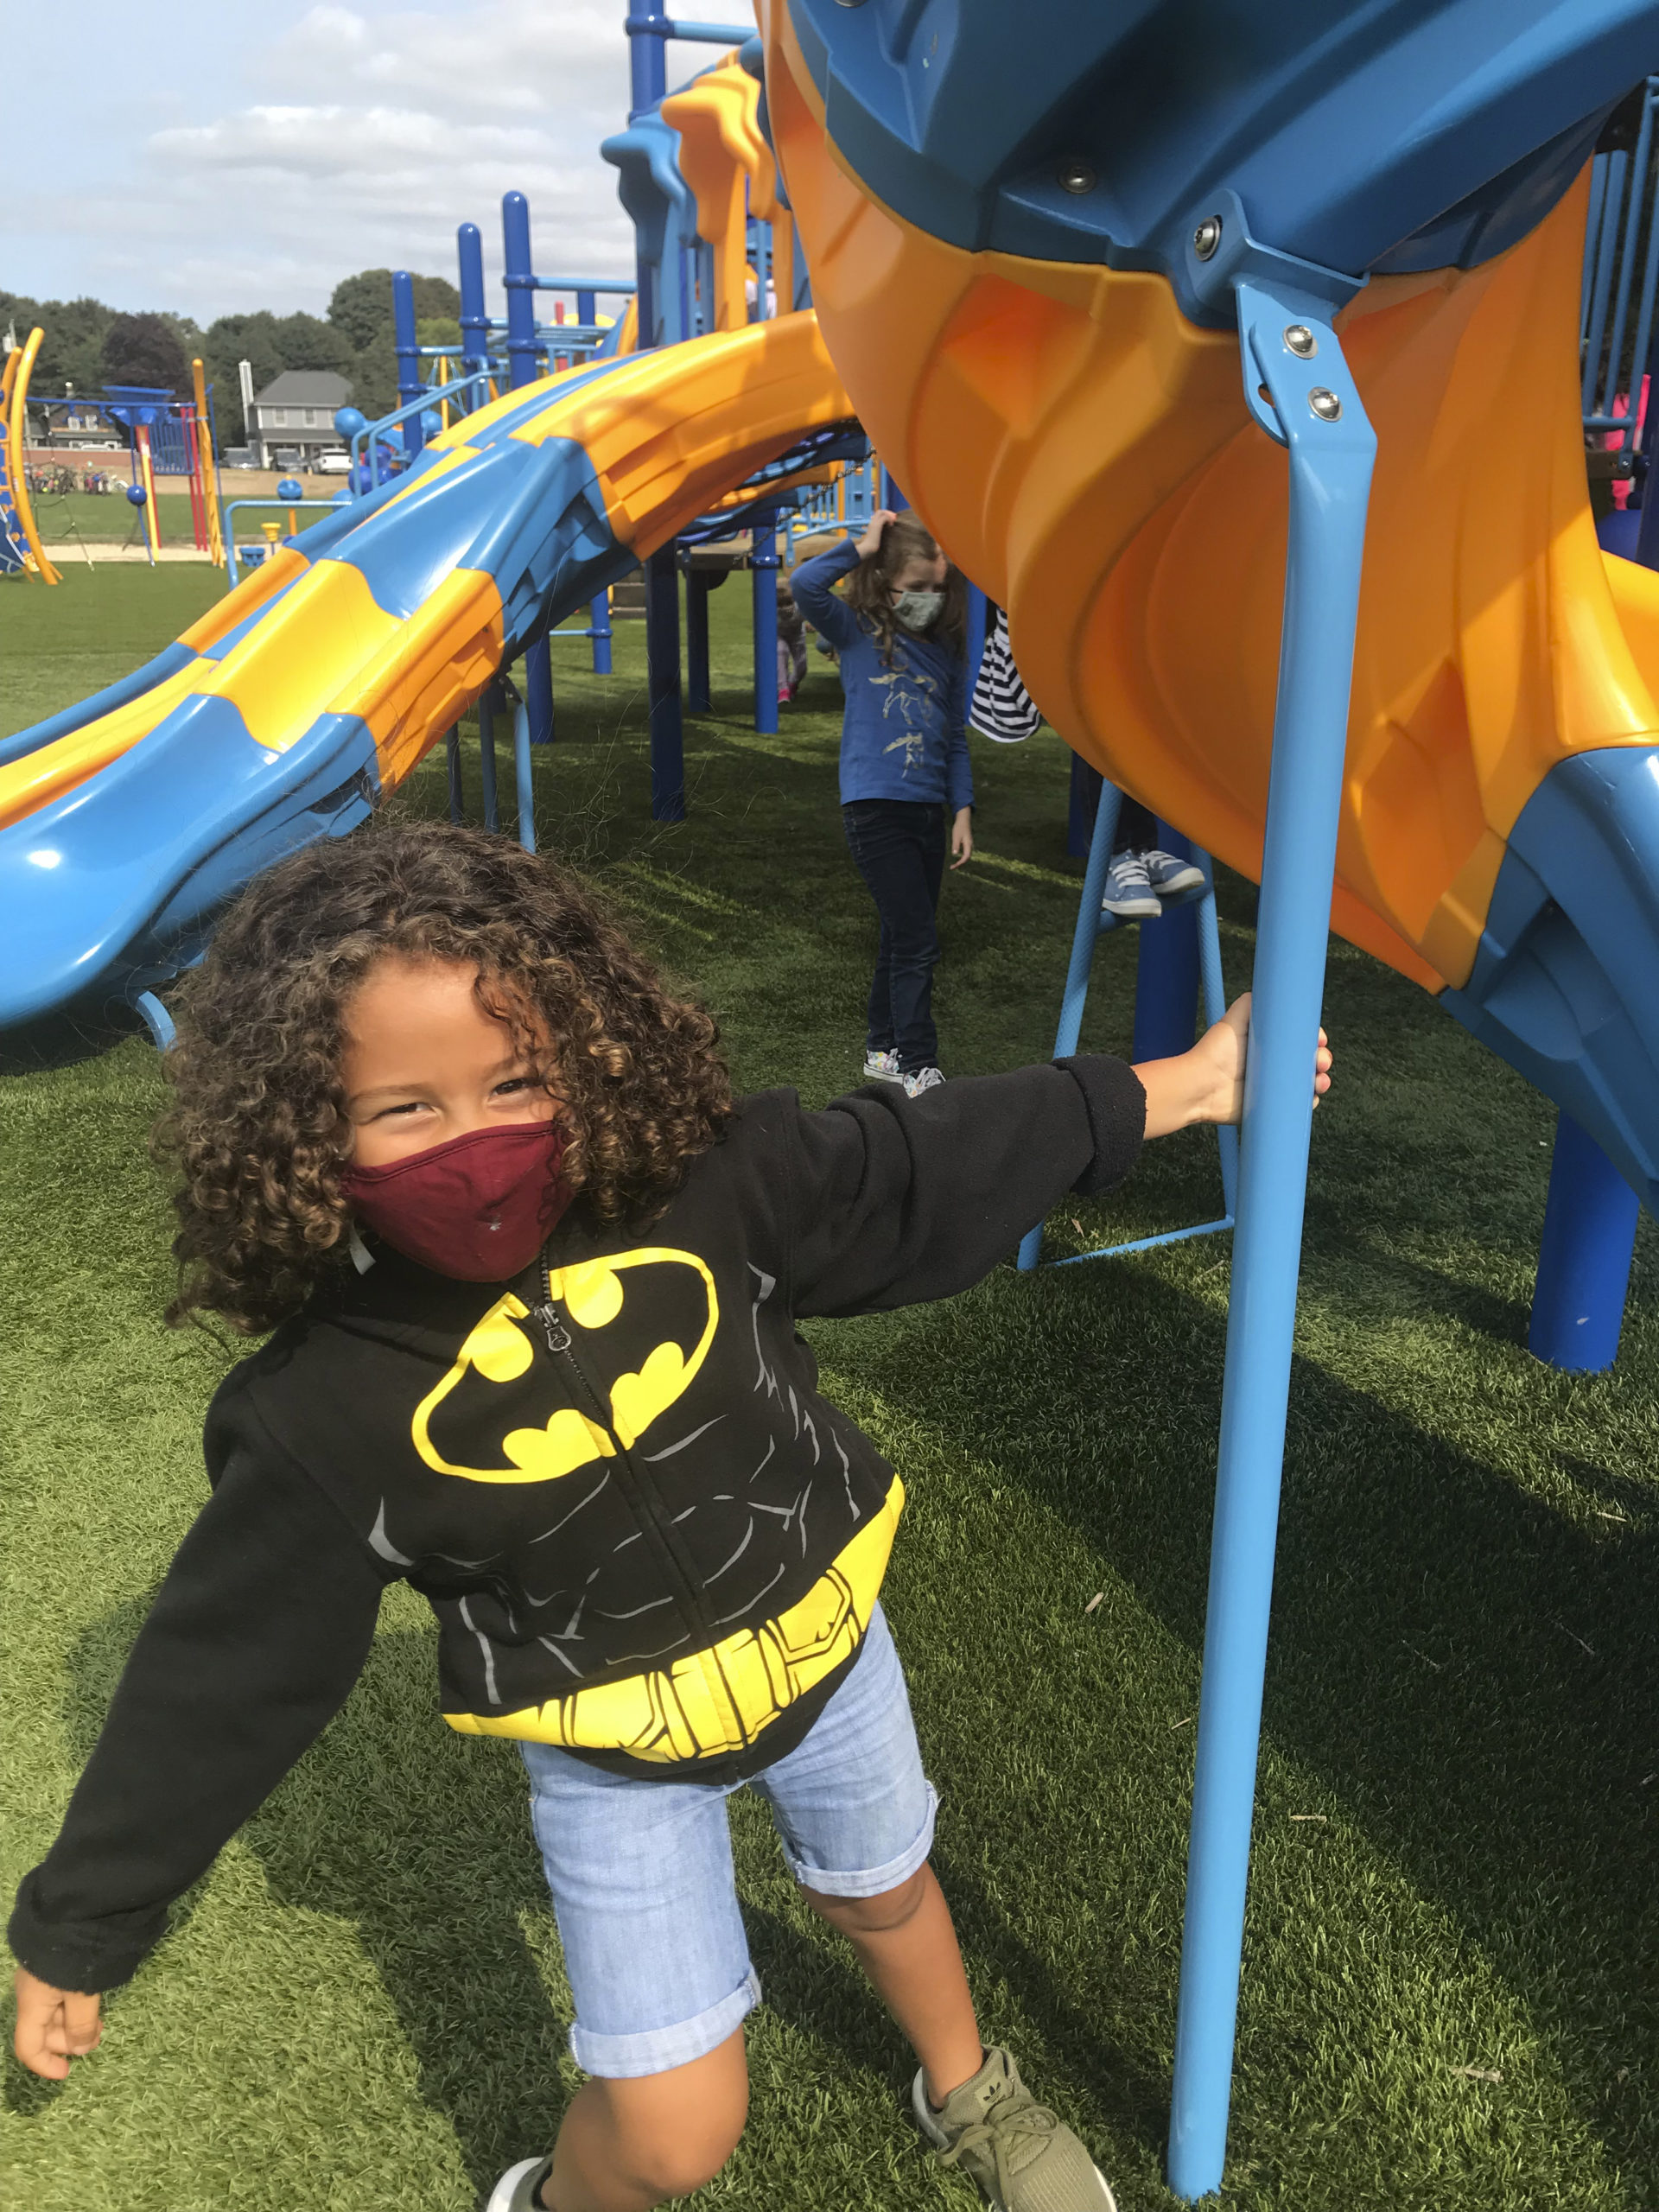 East Quogue School kindgergartner Aaron Marte enjoying the outdoors and having fun on the playground.
Courtesy East Quogue School District